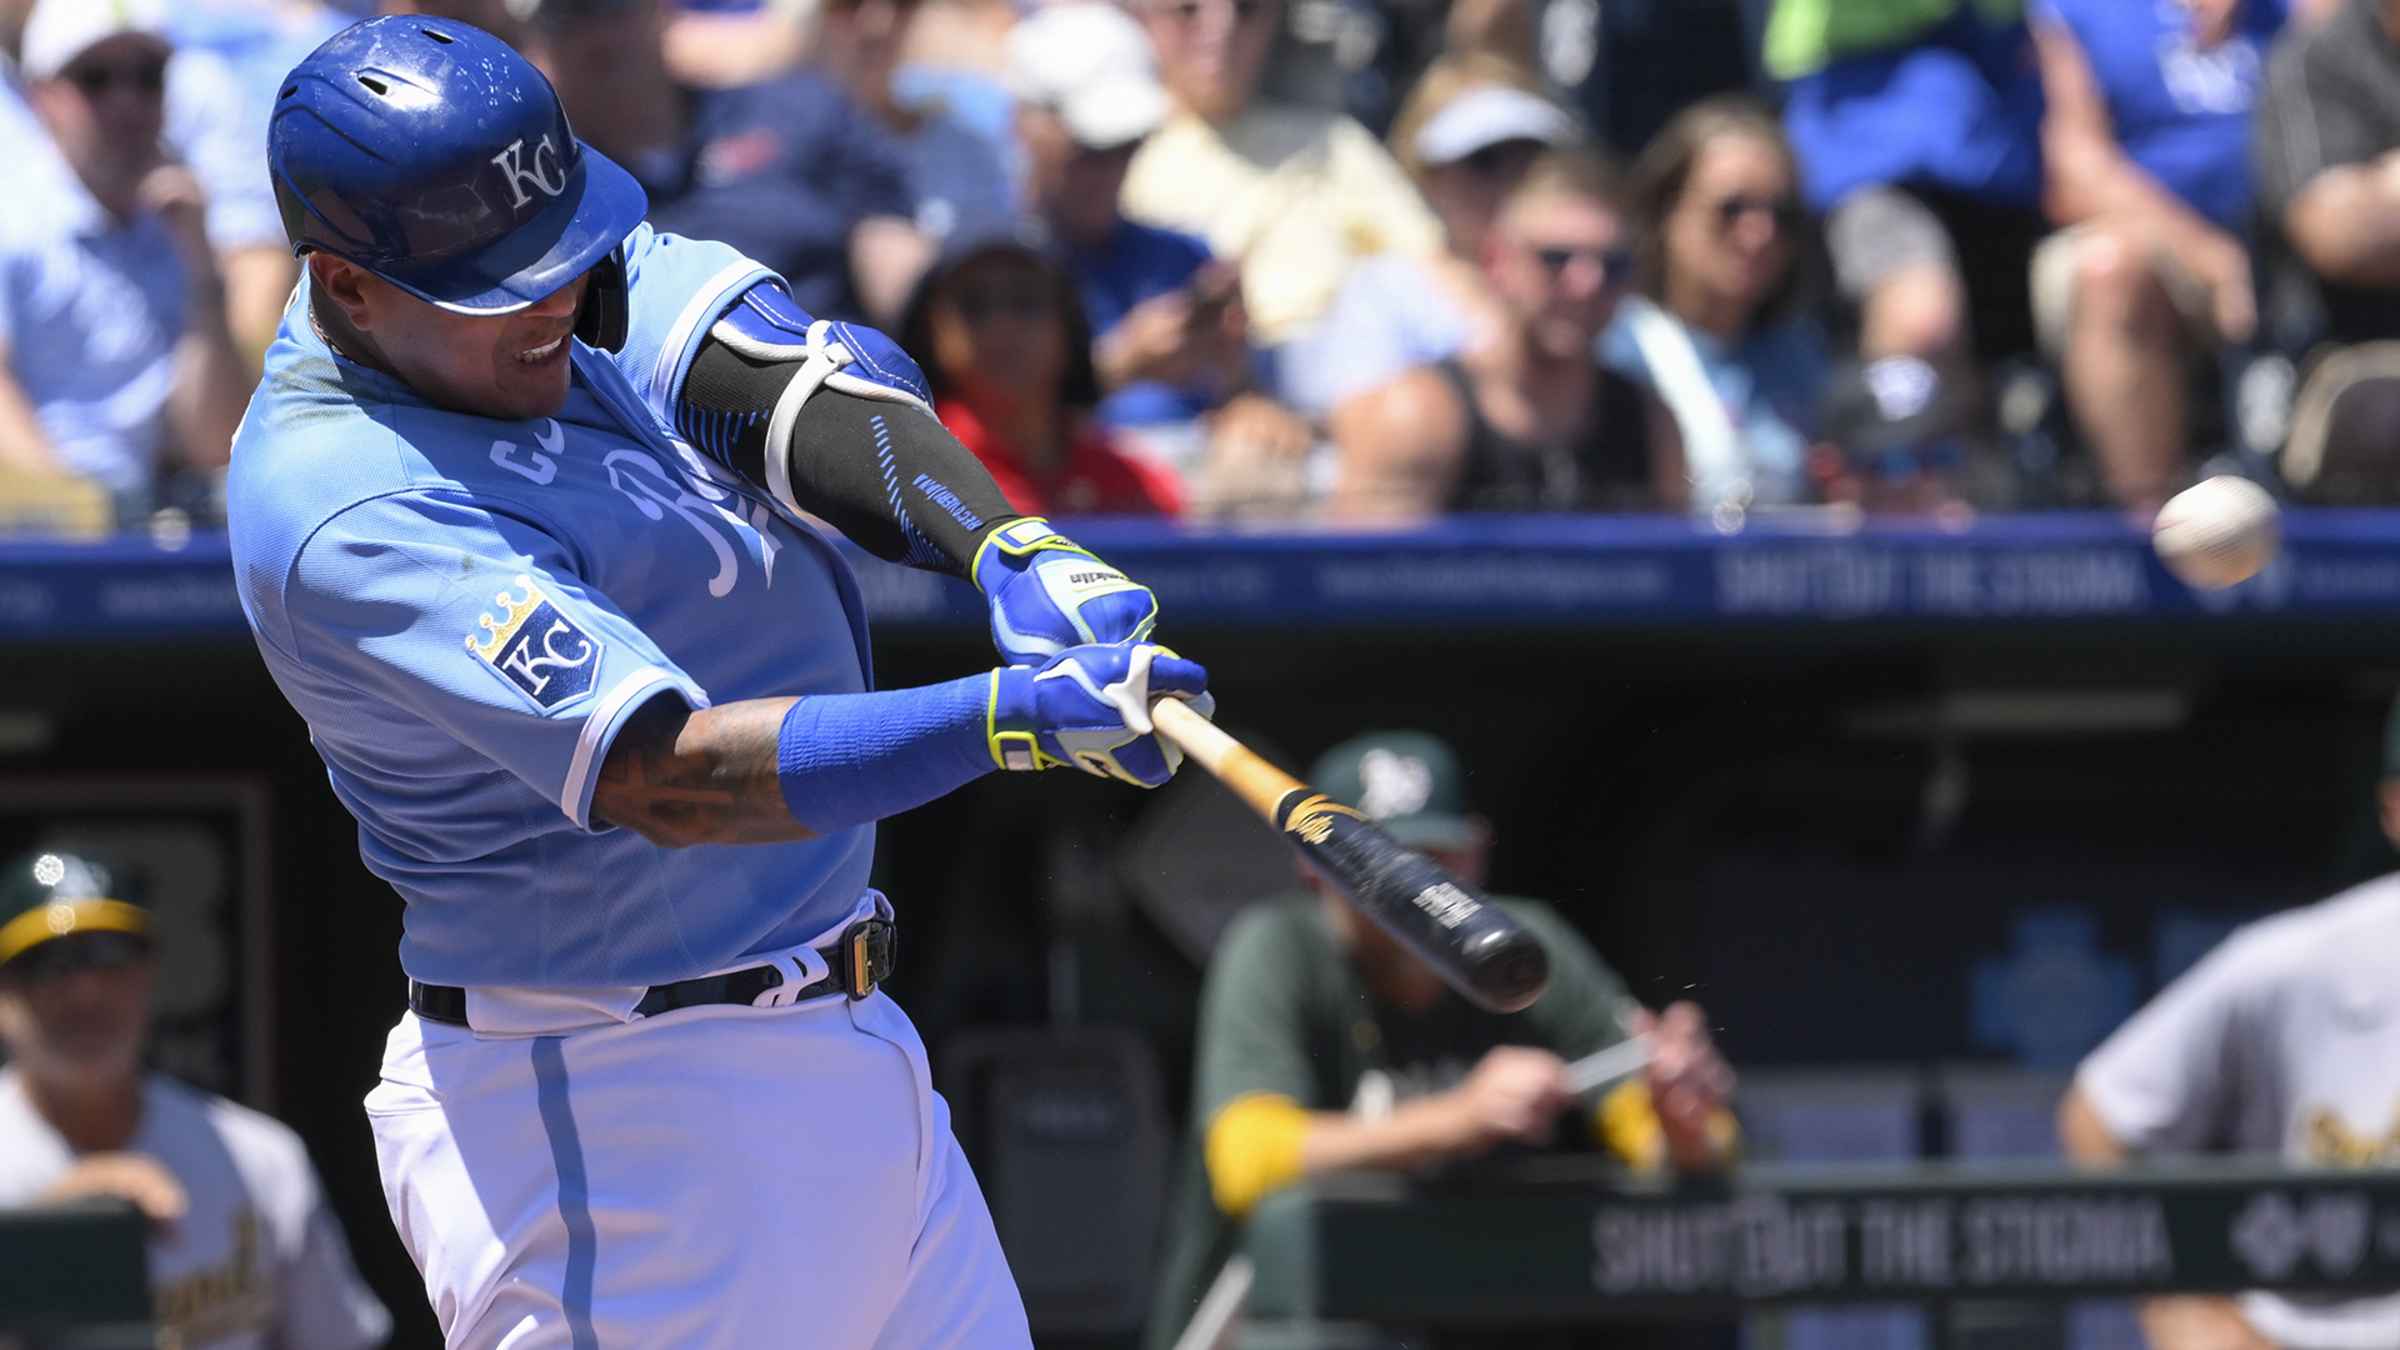 Salvador Perez home run prediction: How many HRs will Royals C hit